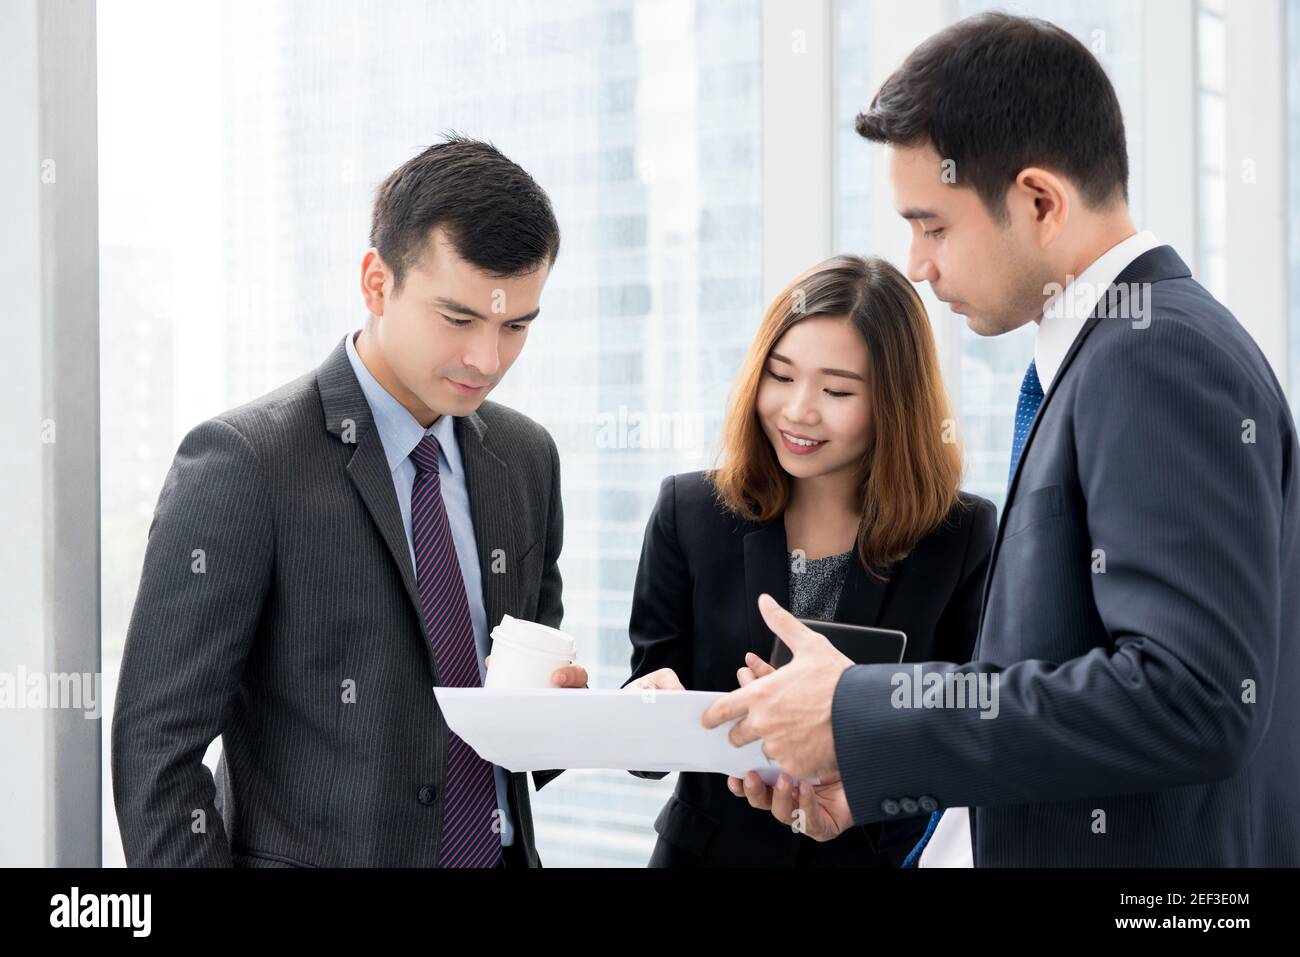 Multiethnic business people discussing work at office building hallway Stock Photo